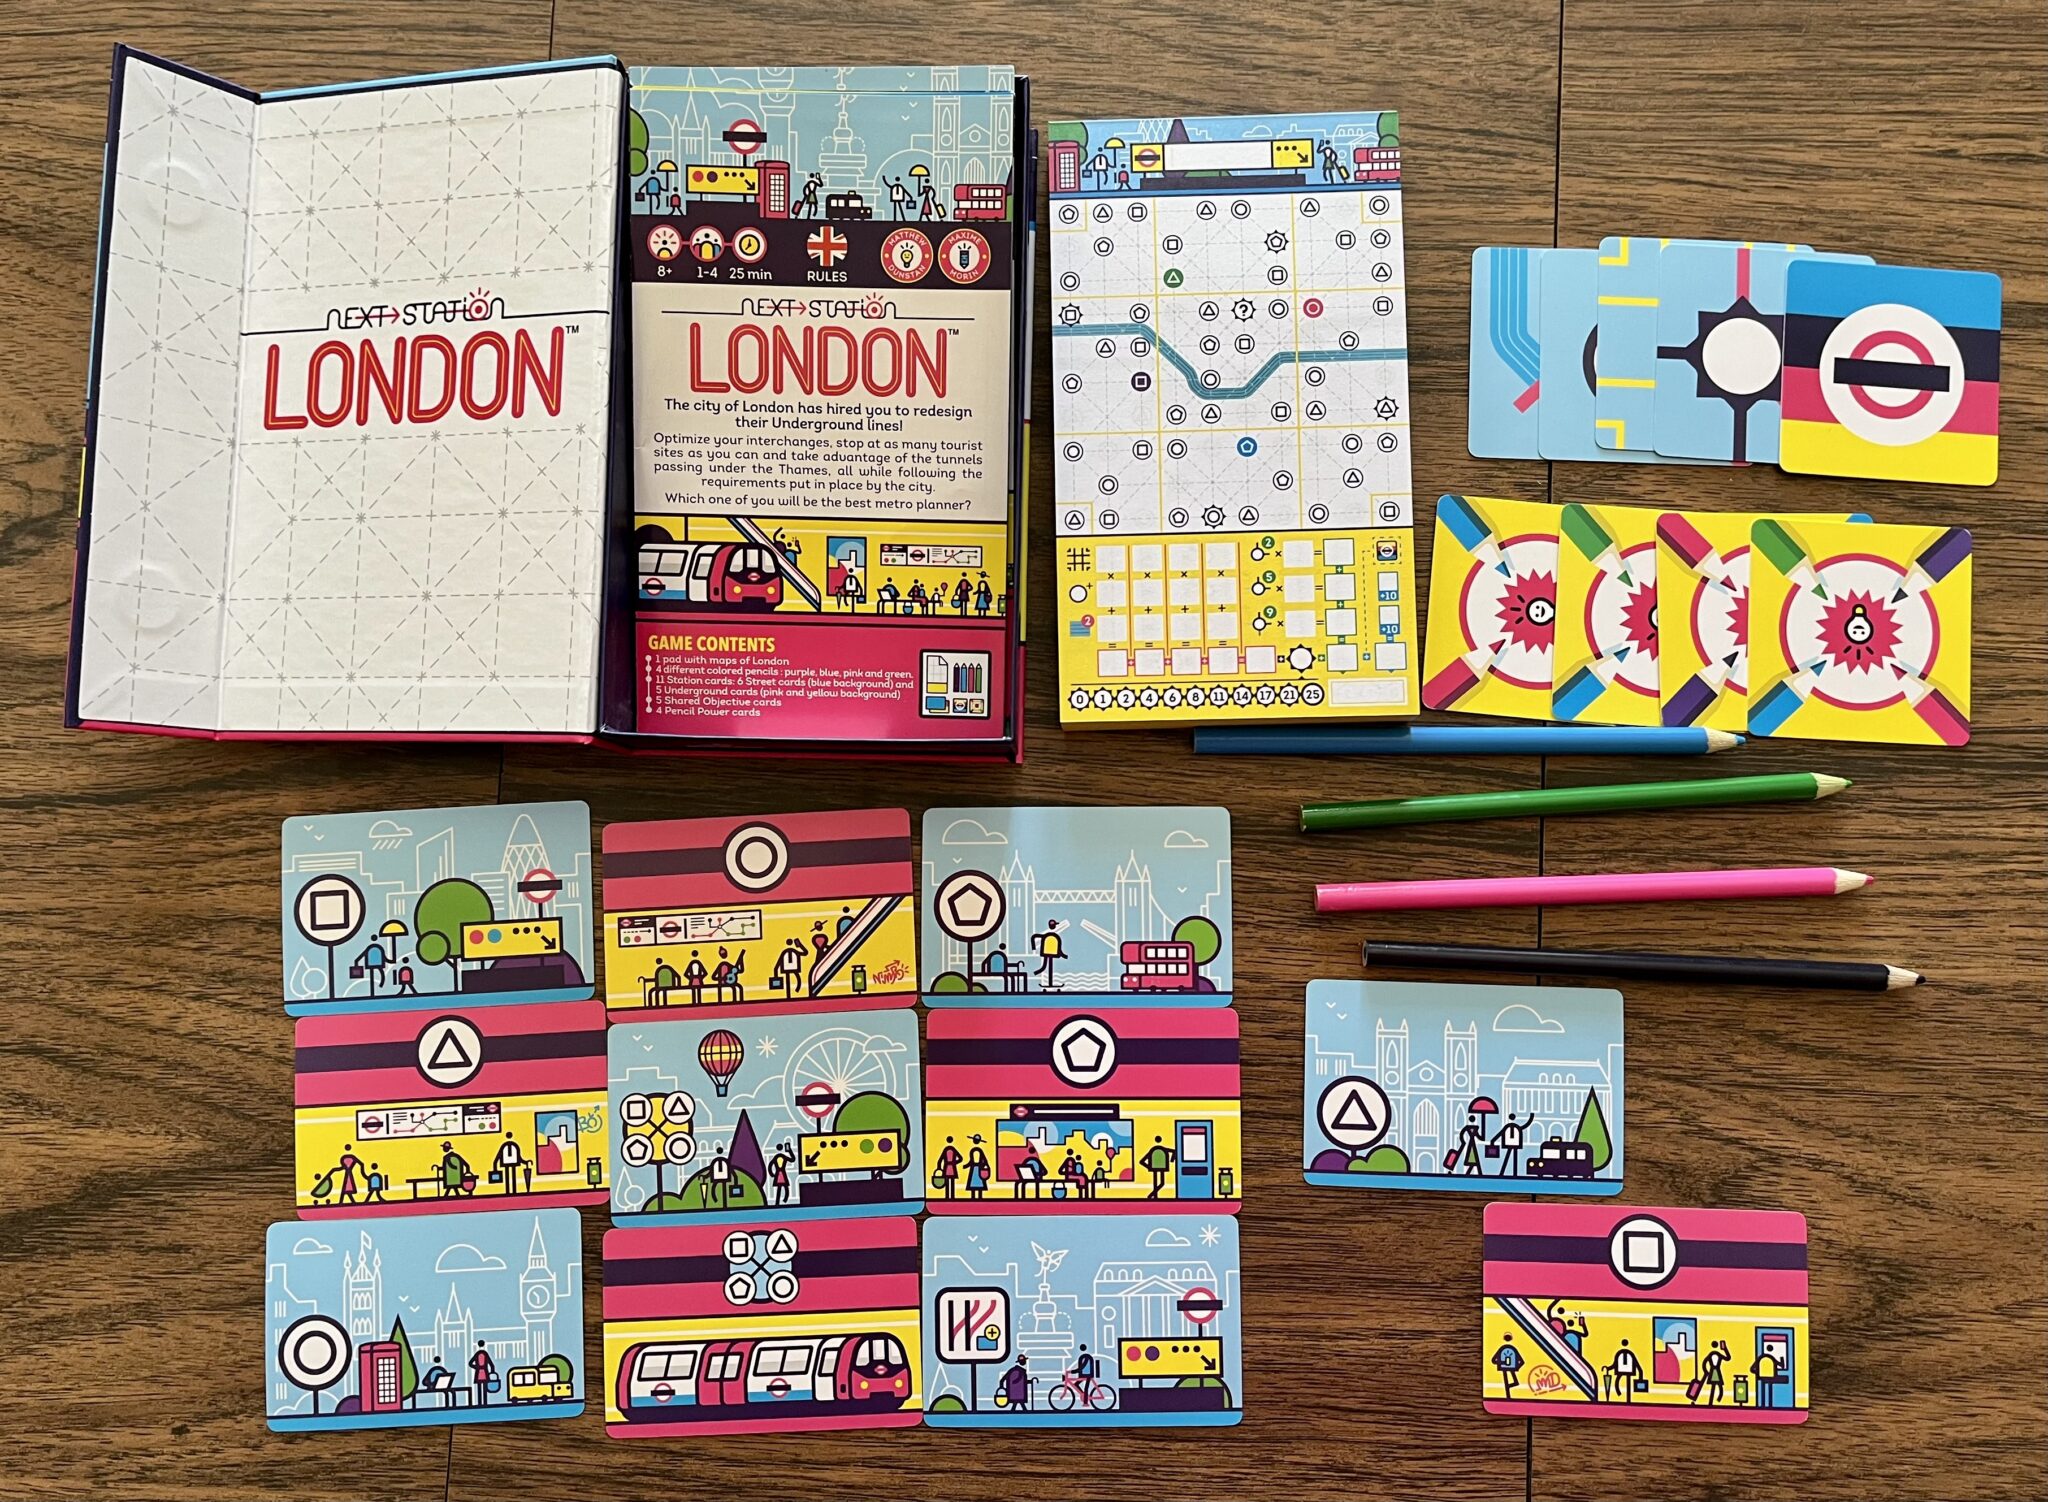 Next Station: London components out on the table